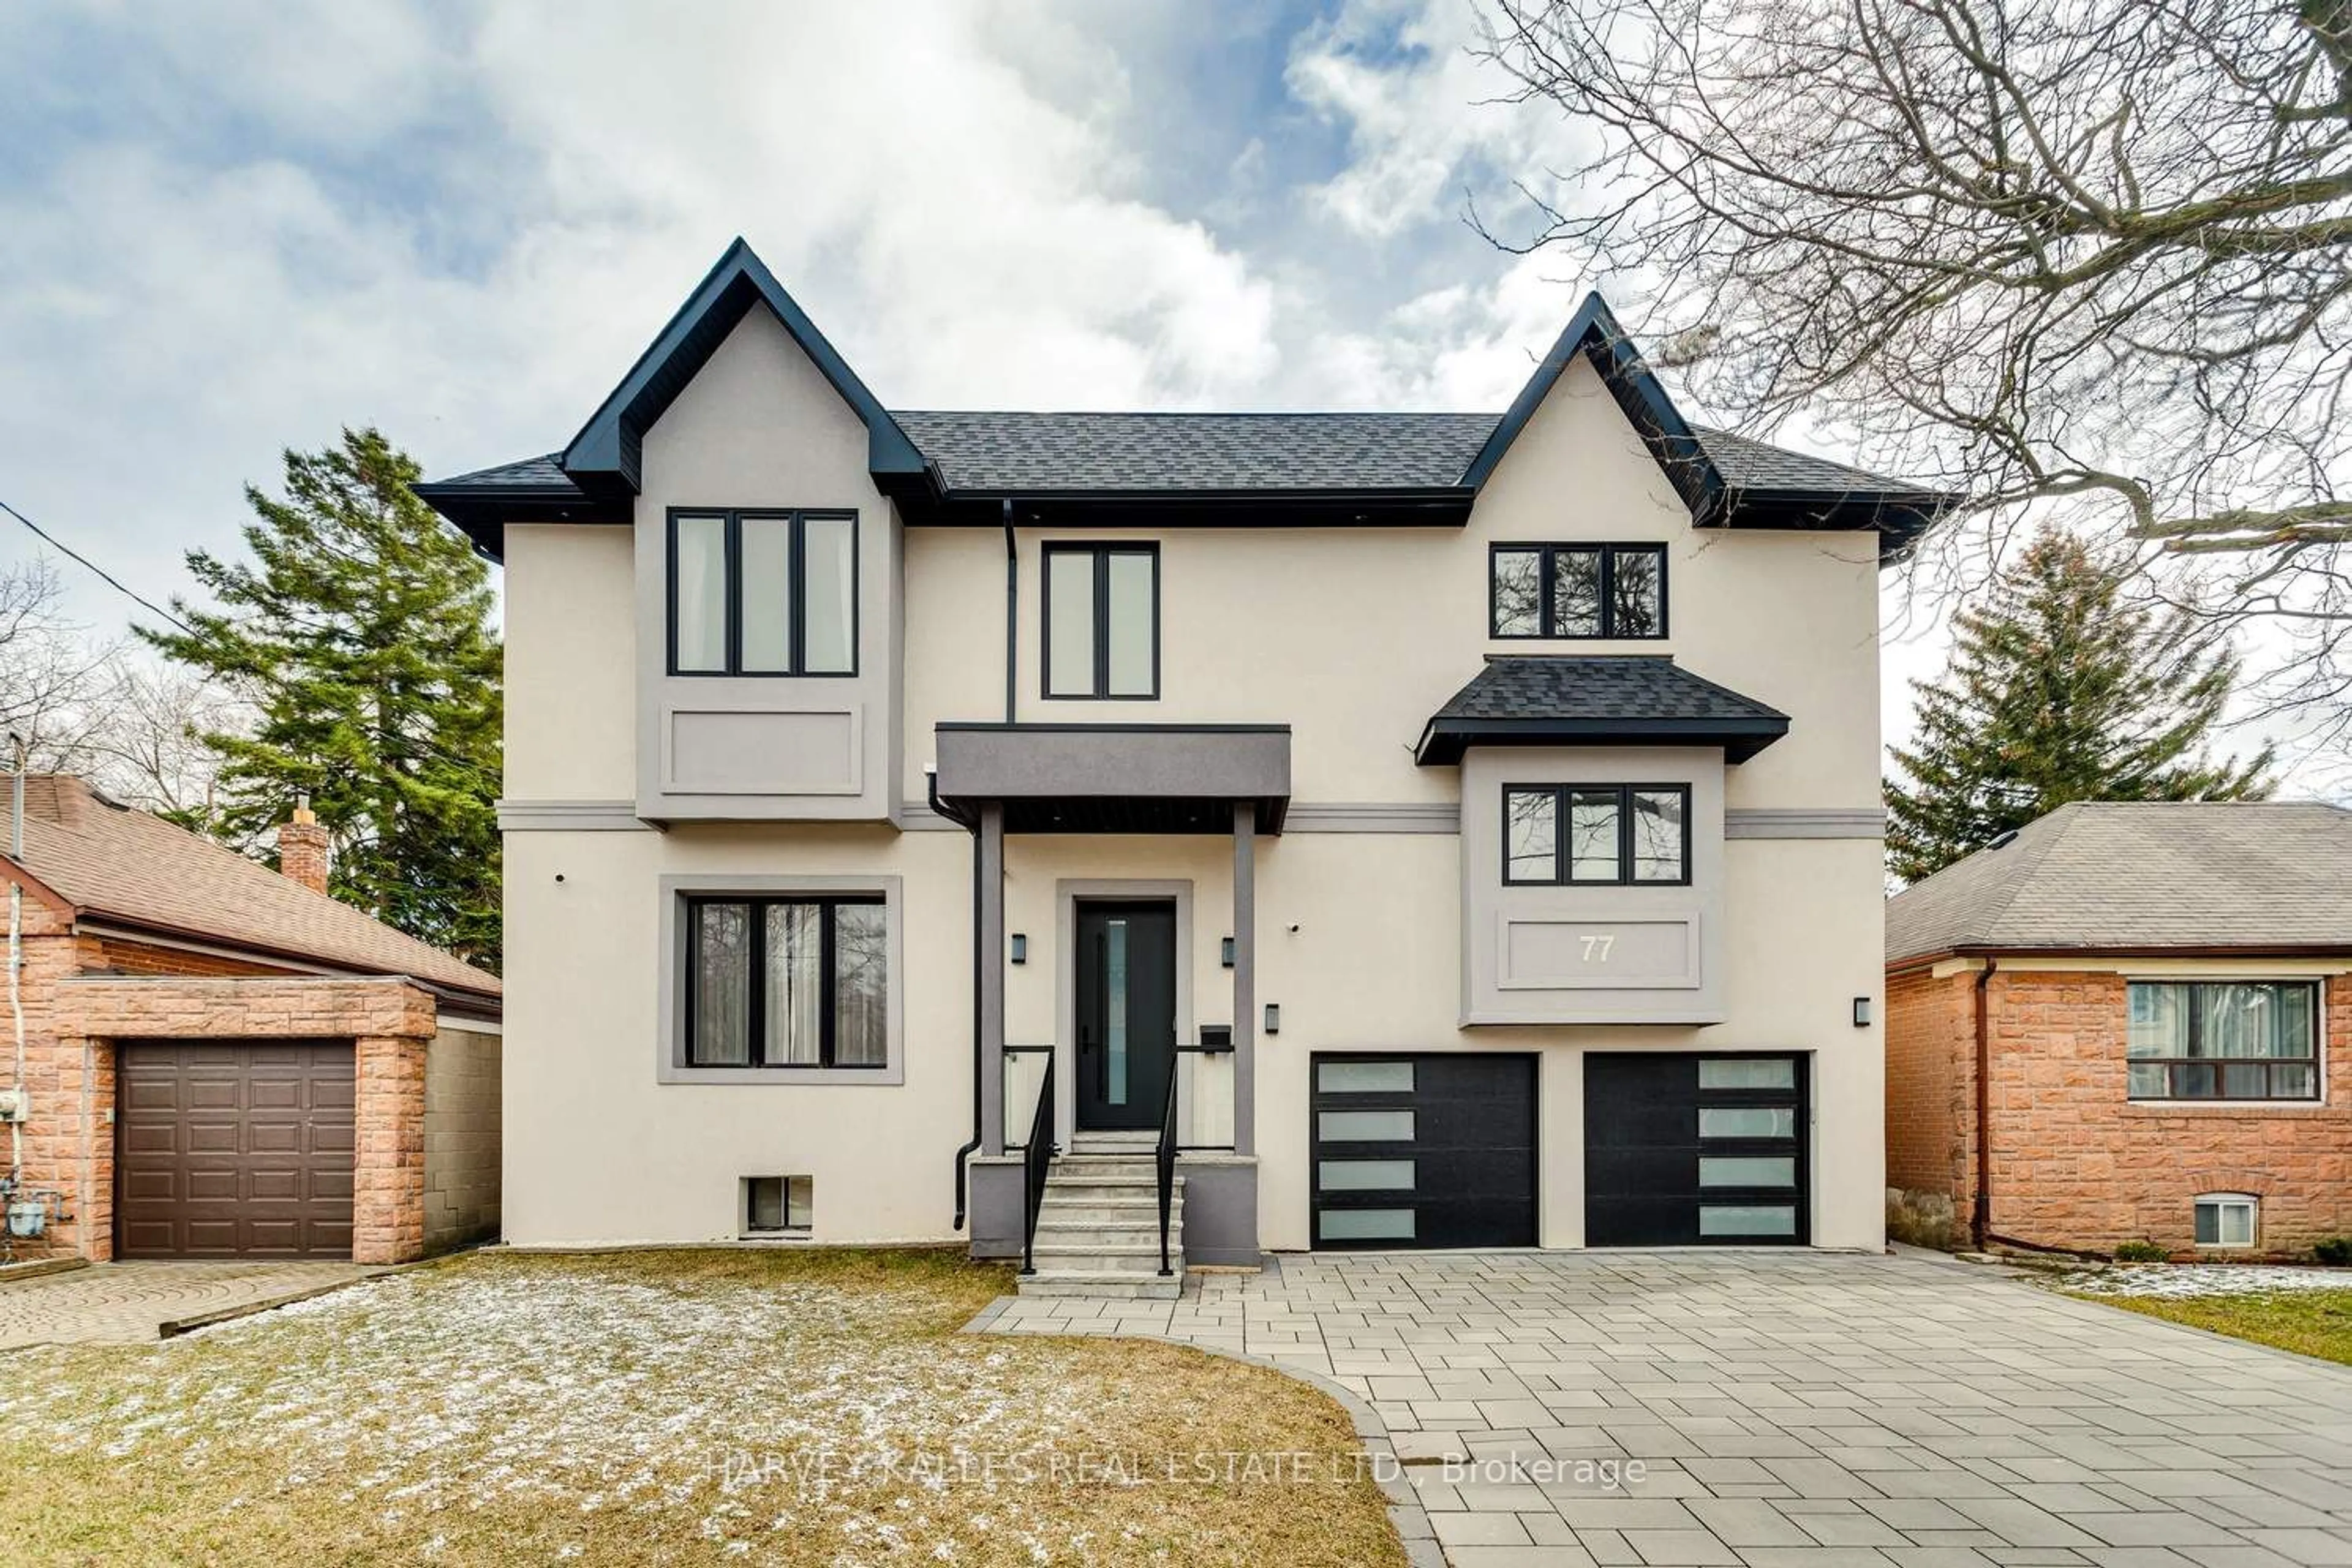 Home with brick exterior material for 77 Fairholme Ave, Toronto Ontario M6B 2W8